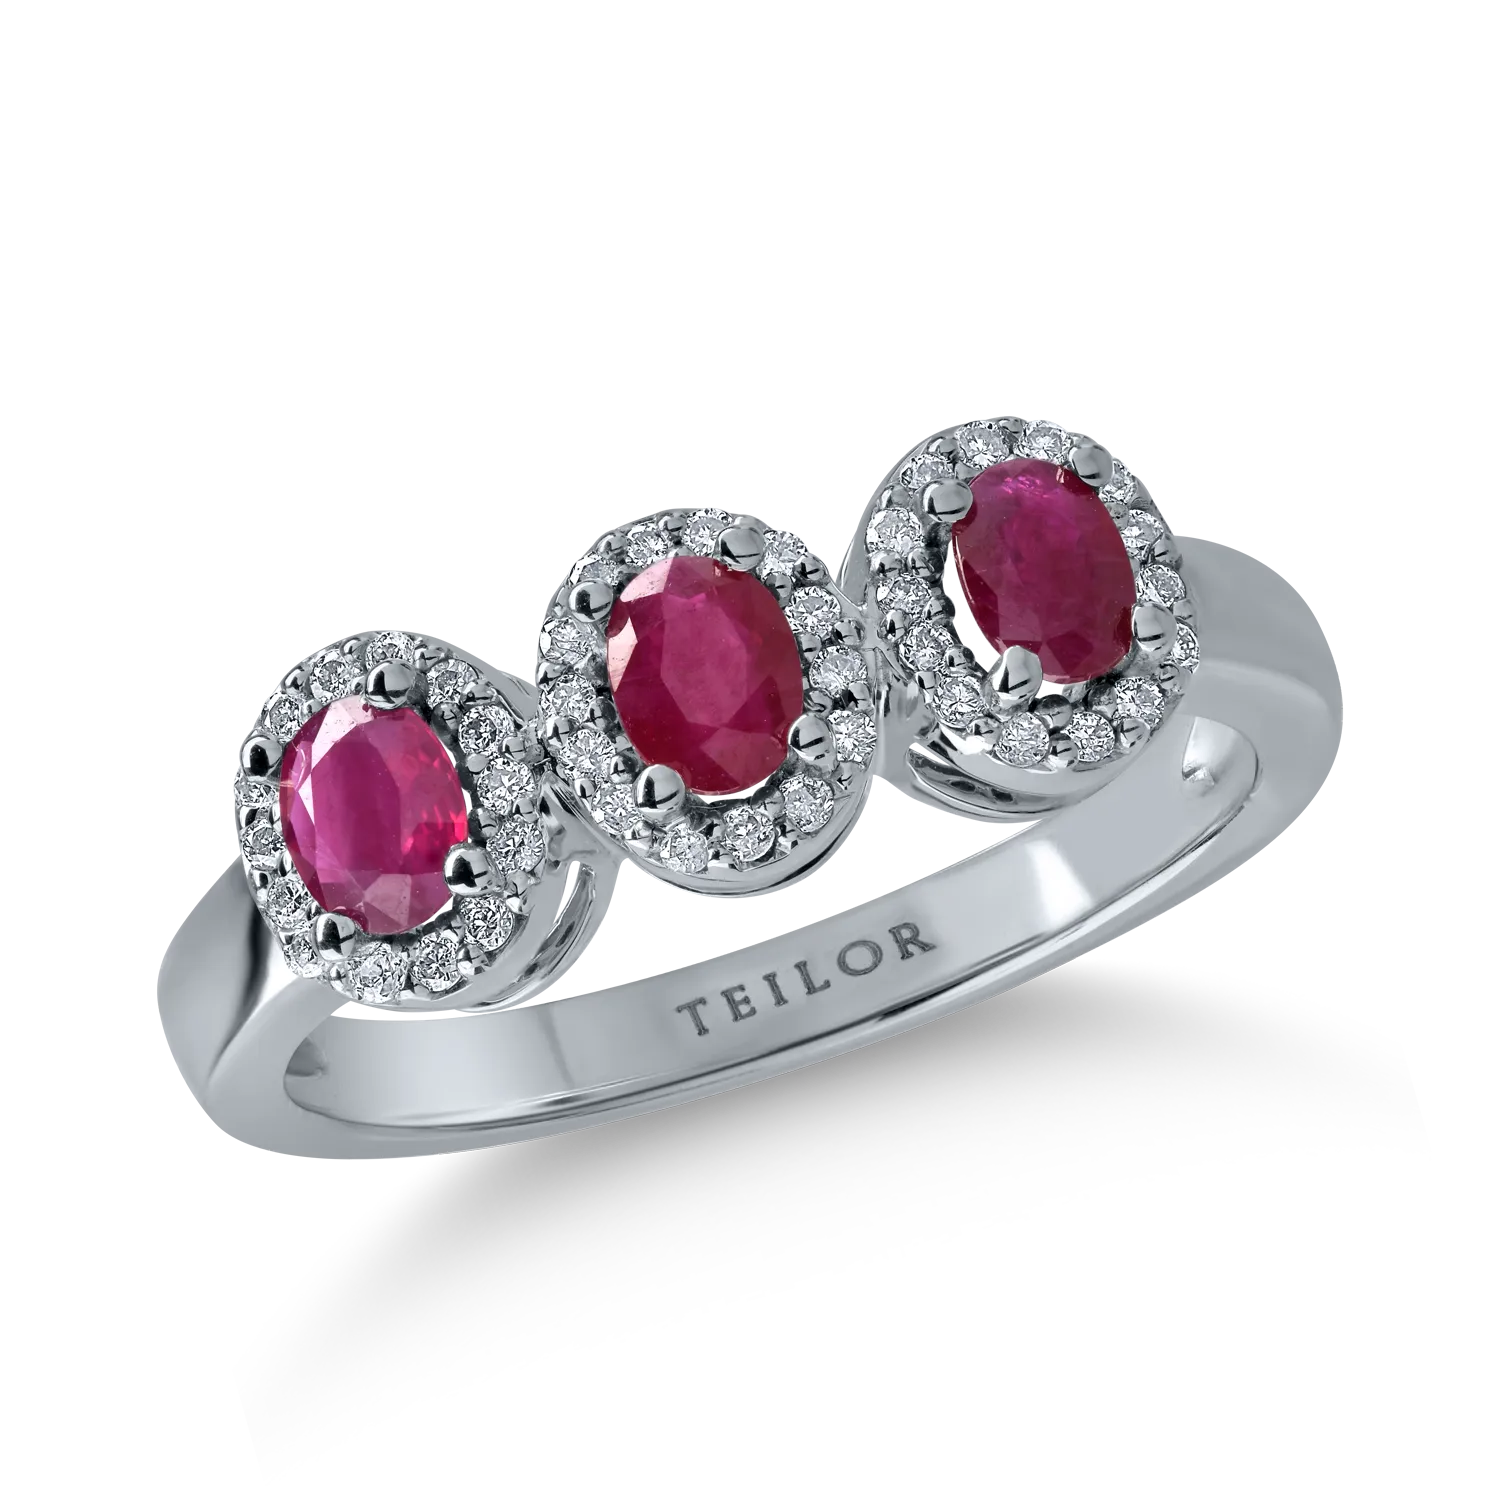 White gold ring with 0.65ct rubies and 0.12ct diamonds